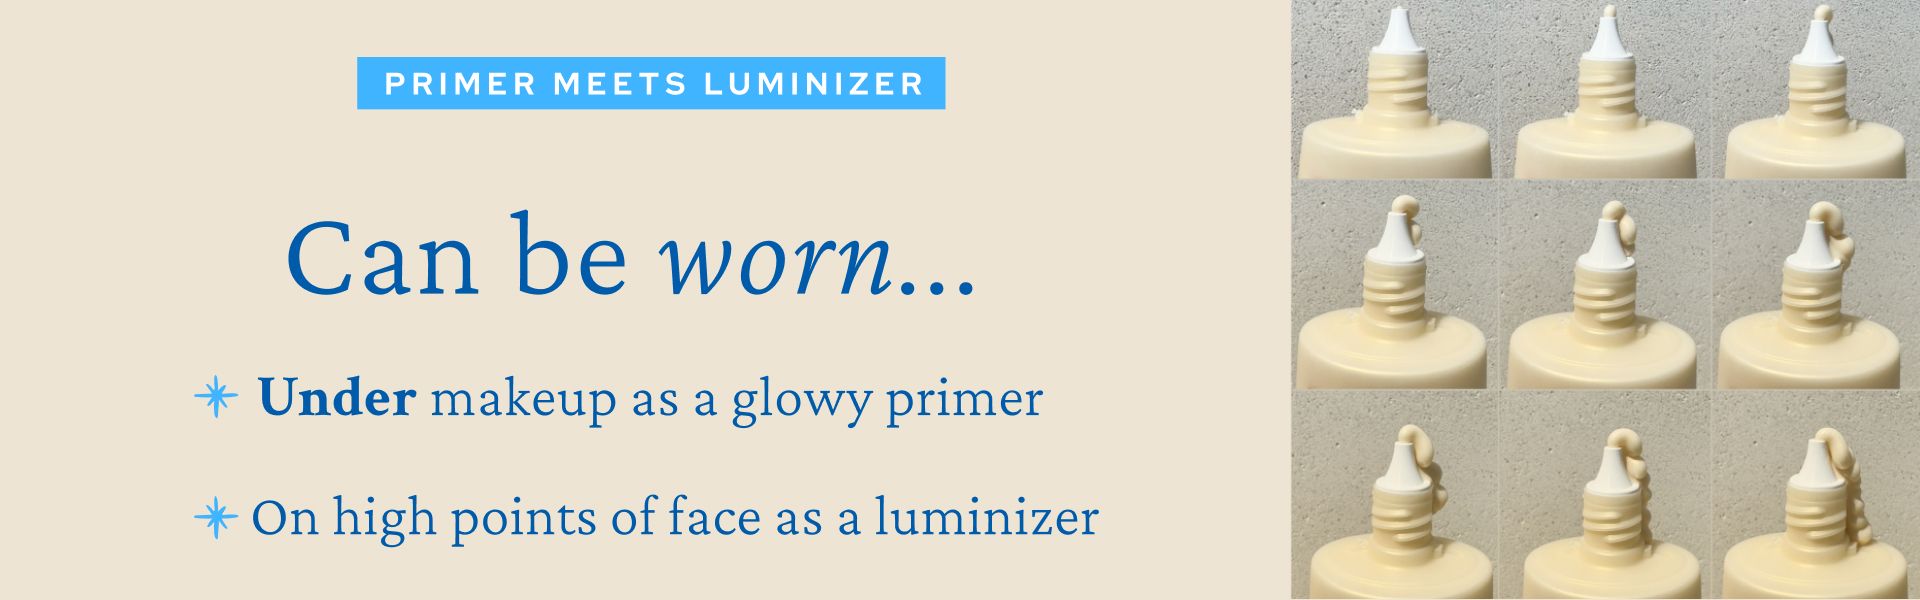 An advertisement for a beauty product combining primer and luminizer. Text reads: "PRIMER MEETS LUMINIZER Can be worn... *Under makeup as a glowy primer *On high points of face as a luminizer." Right side shows a collage of the product's nozzle in different orientations.